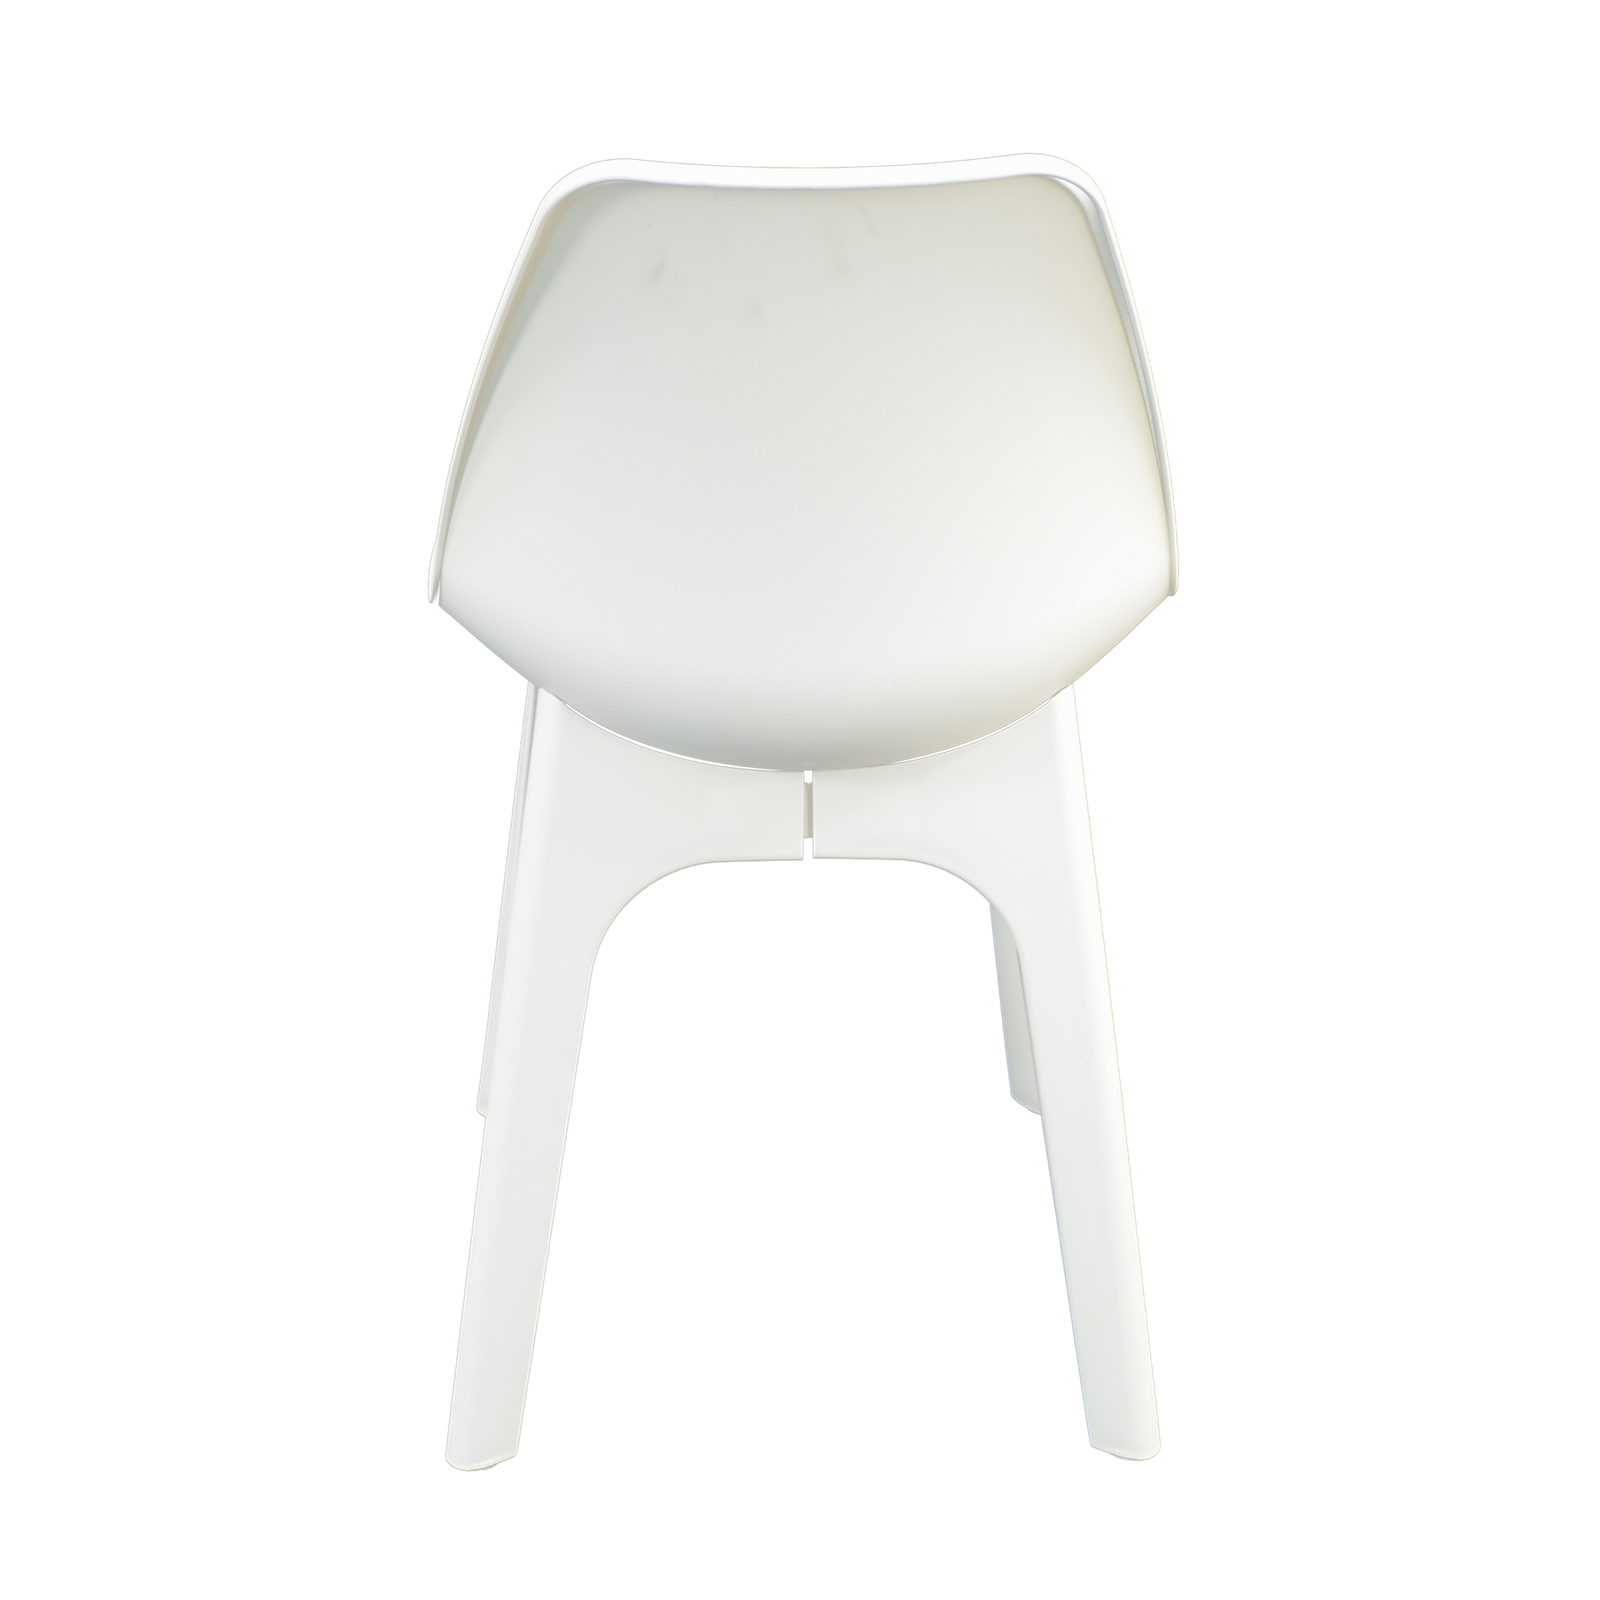 Trabella Eolo Chair in White (Pack of 2) Chairs Trabella Default Title  